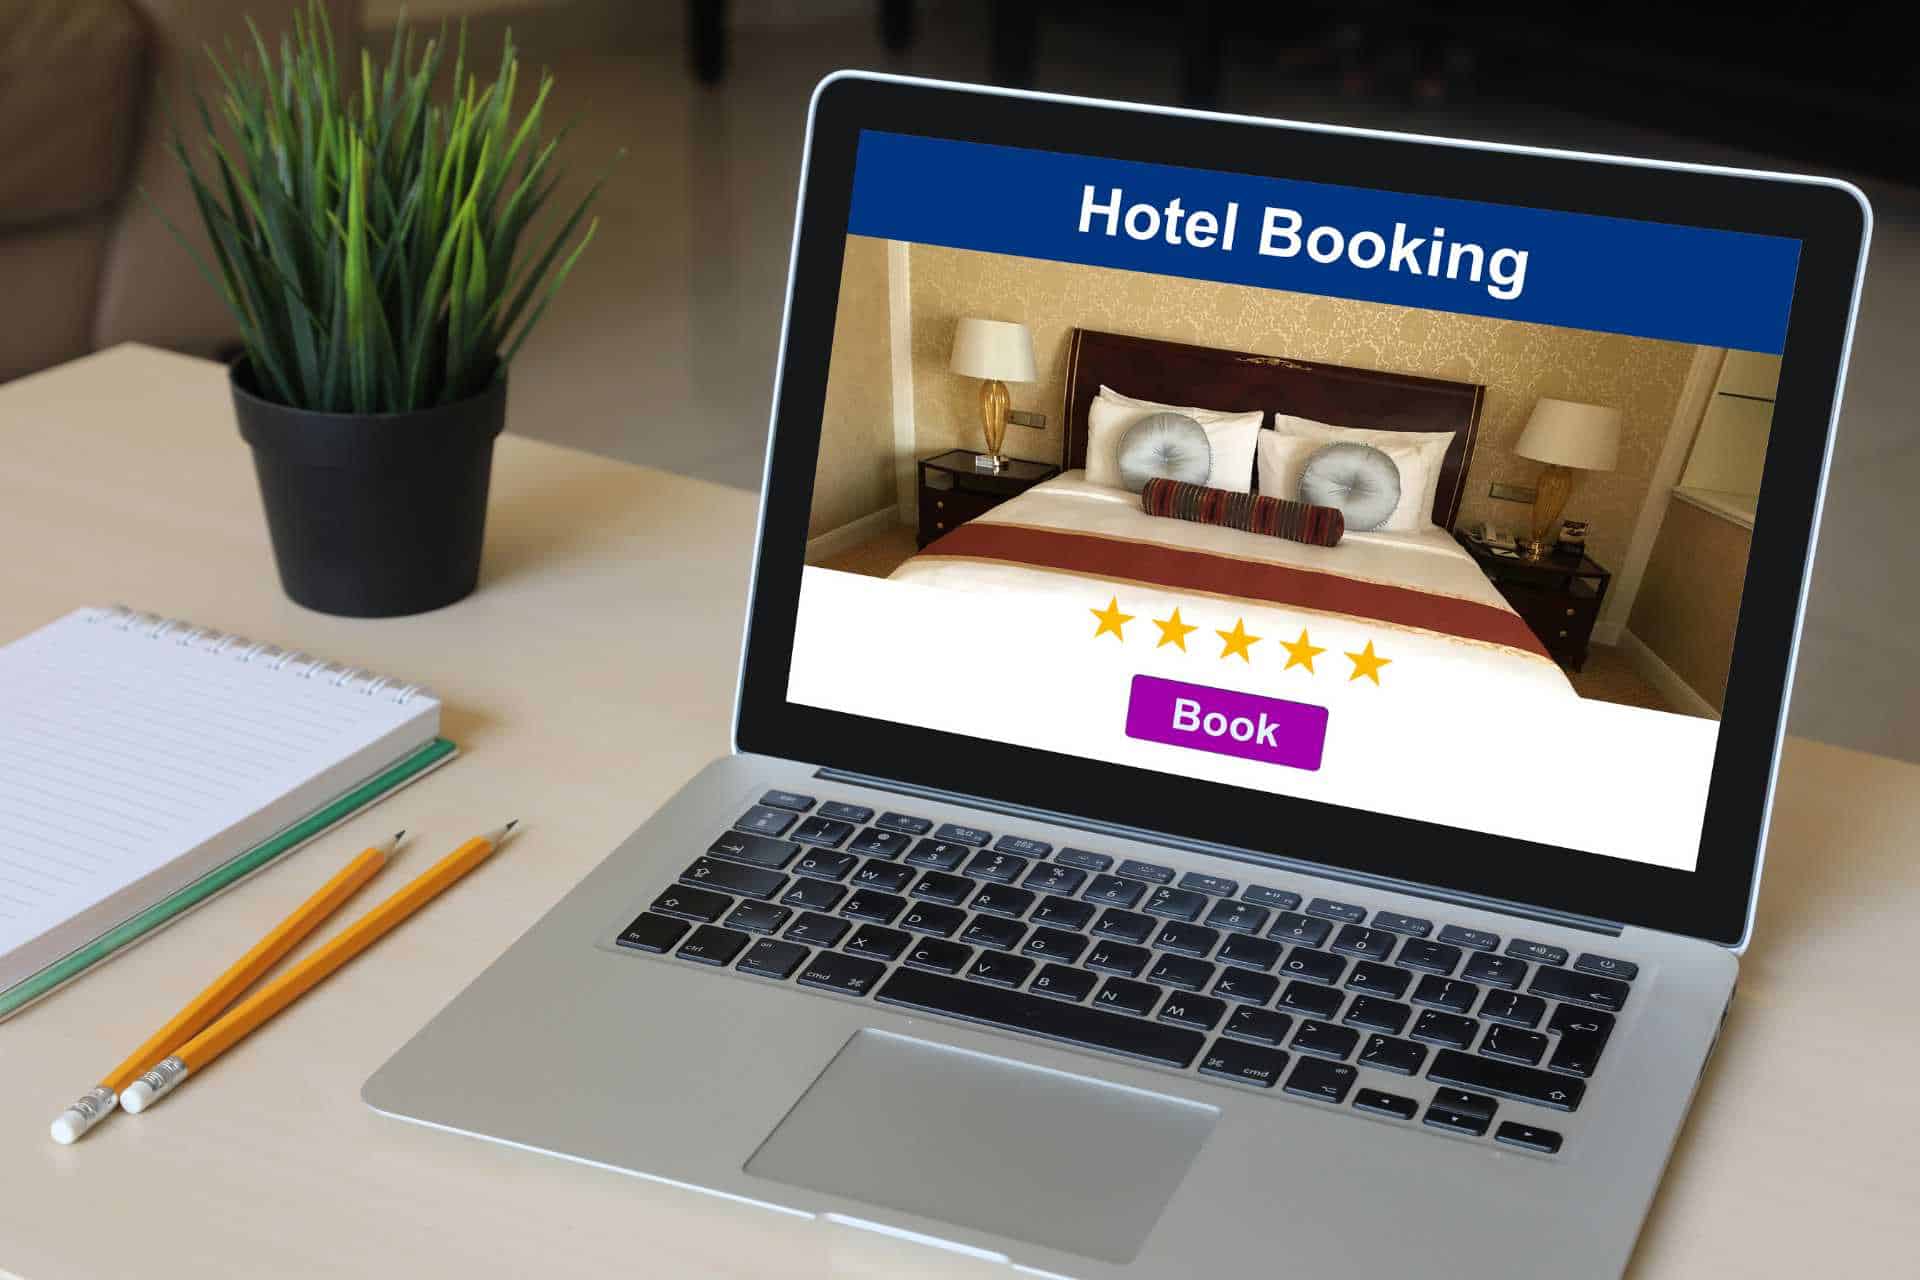 Online hotel booking interface open on a laptop screen with a five-star rating and a 'Book' button, set on a desk with a notebook, pencils, and a potted plant, symbolizing guest intent in the hotel industry towards convenient and rated accommodation options.